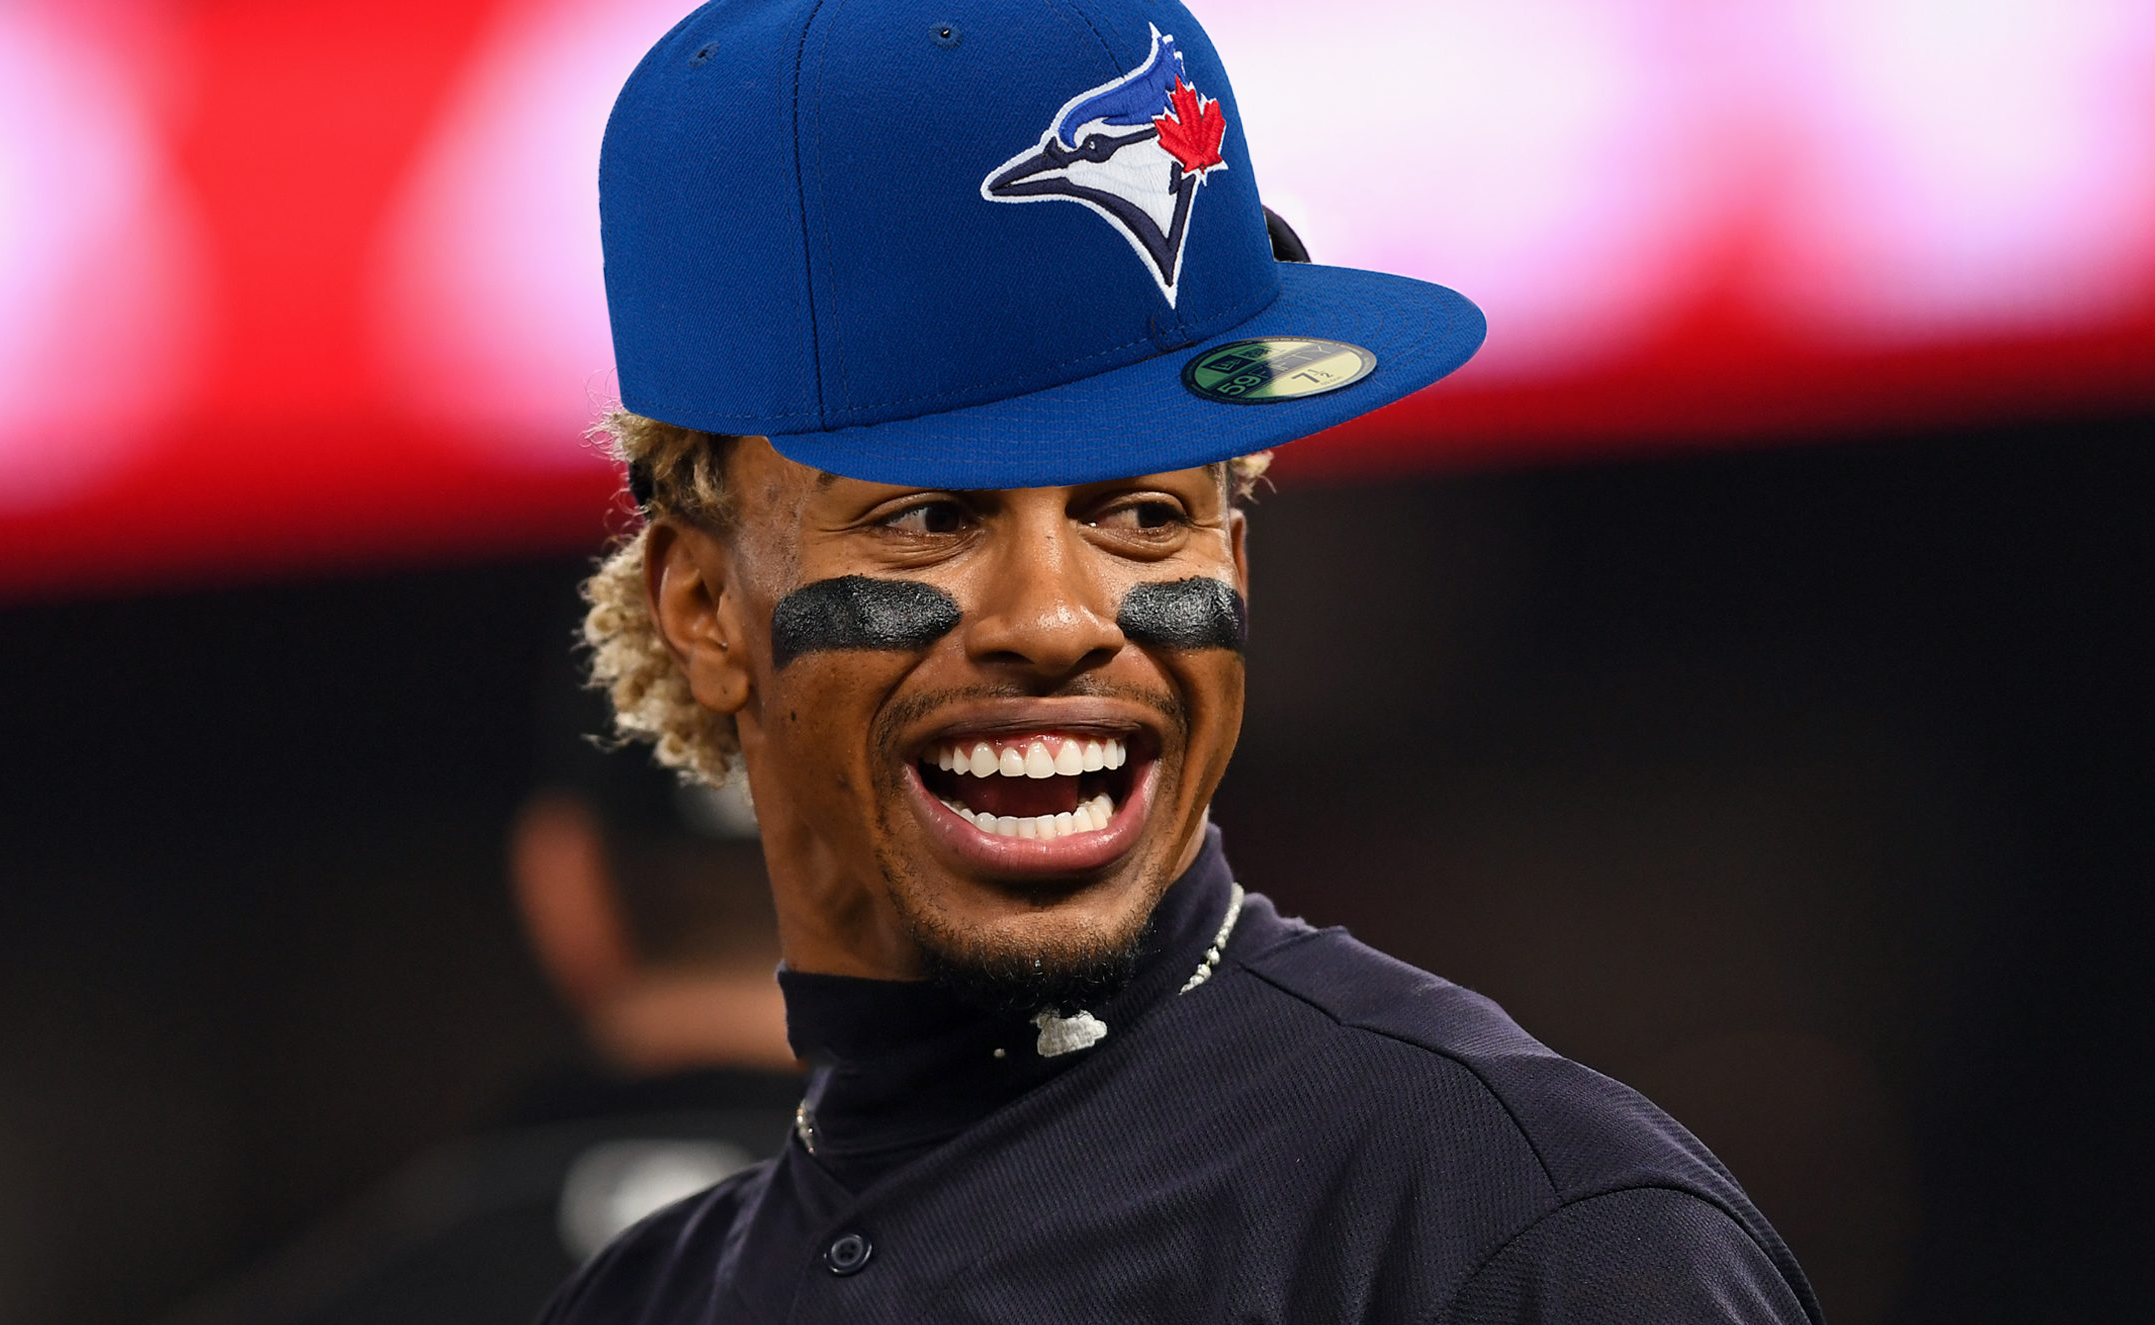 If you were wondering: Yes, Francisco Lindor's hair is still electric blue  and yes, it looks fantastic